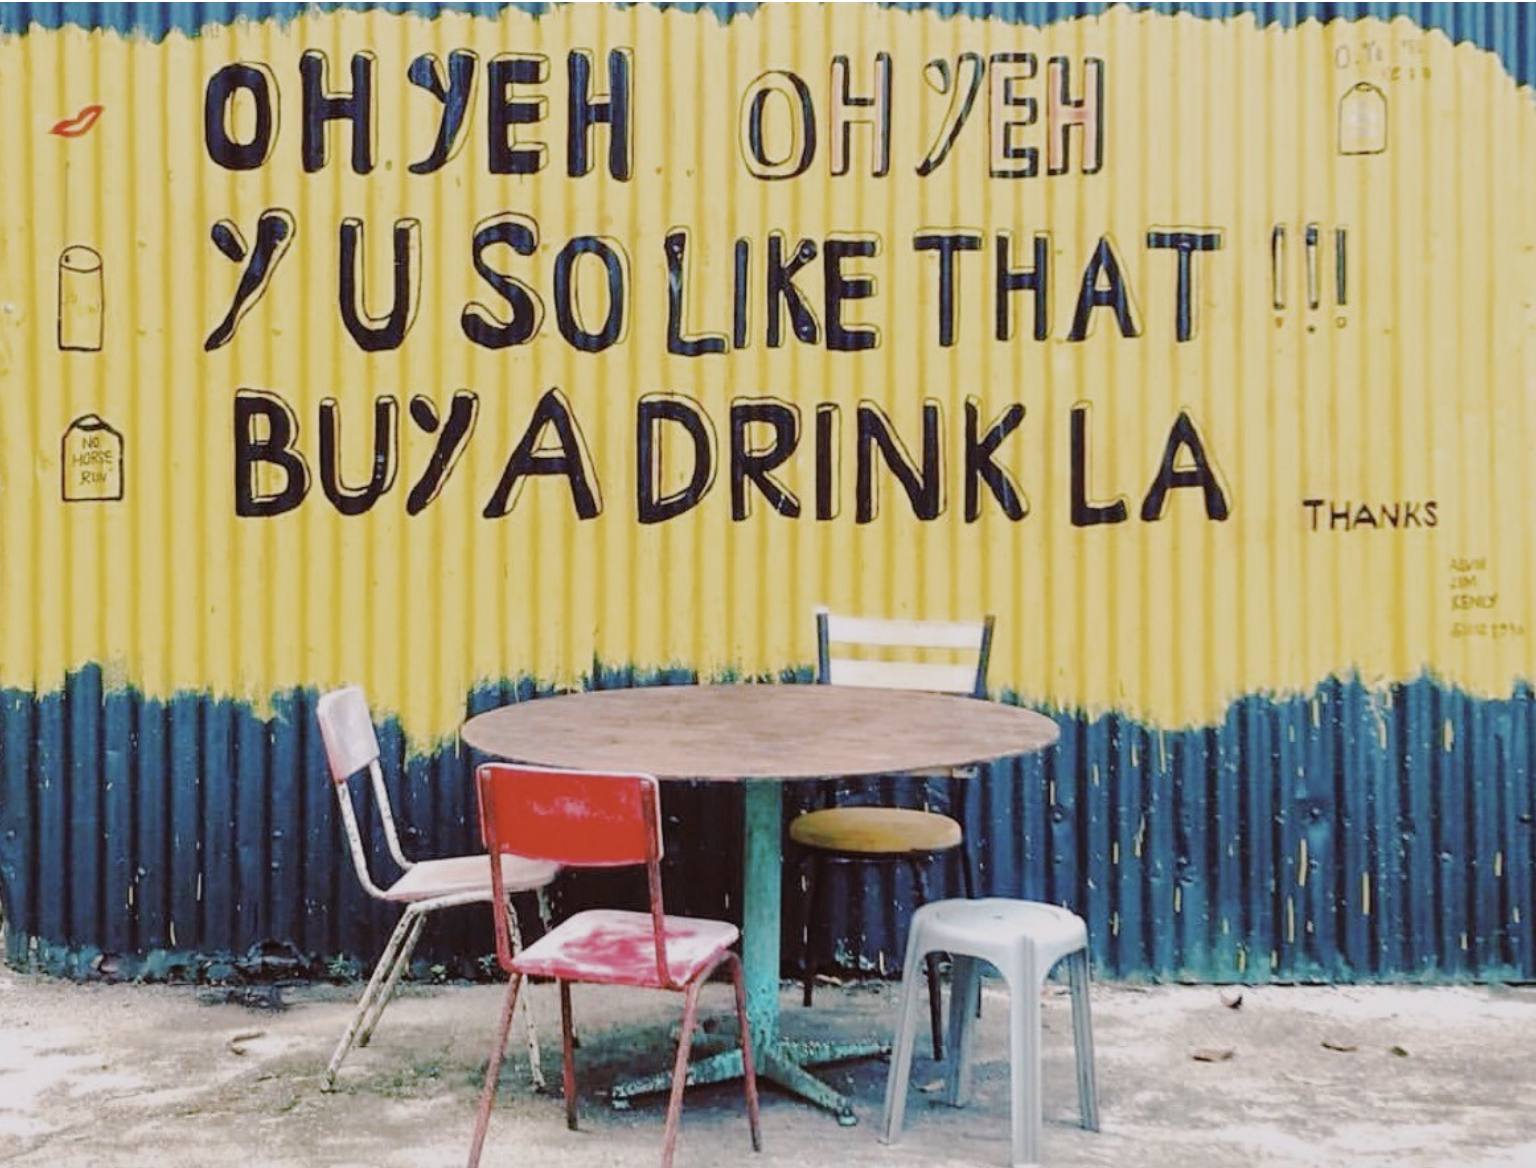 The painted words on a wall read "Oh Yeh Oh Yeh, Y U So Like That!!! Buy A Drink La" in front of a table and chairs